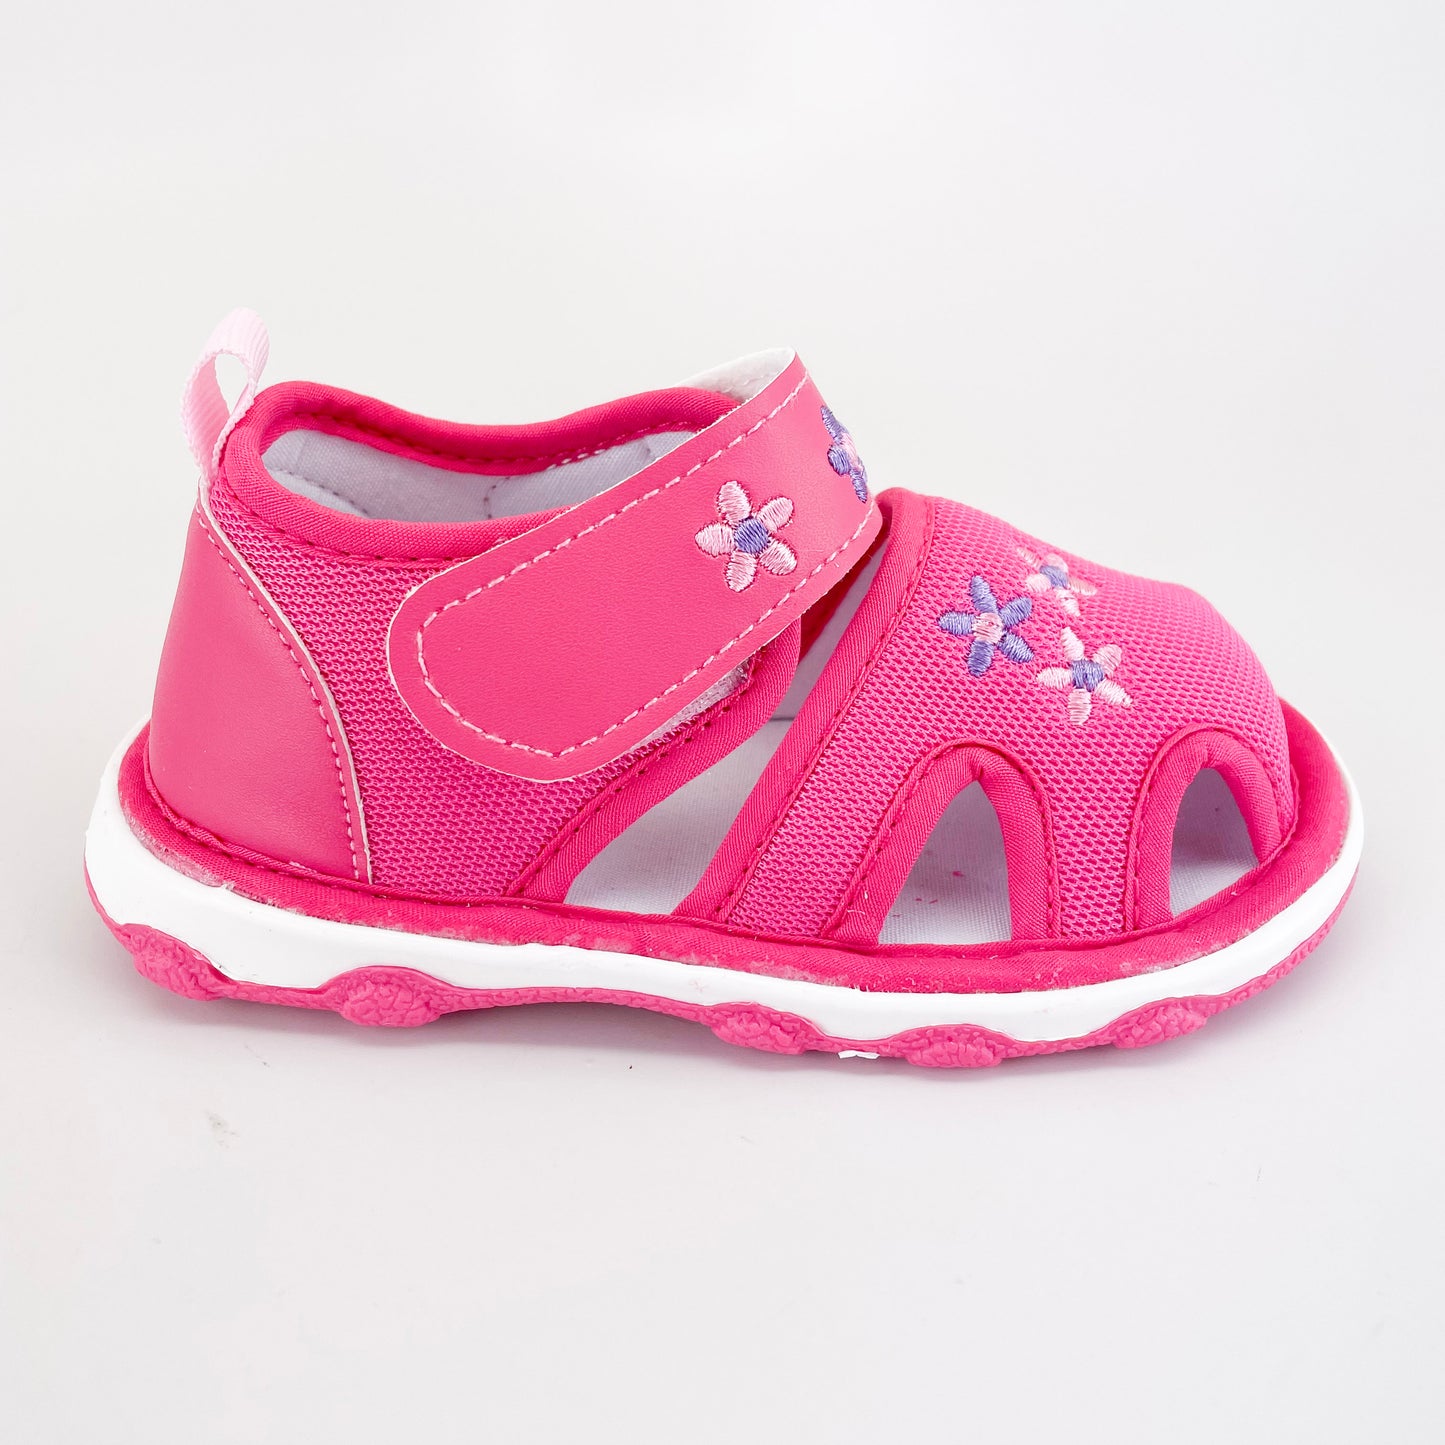 "Daisy" Baby Squeaky Sandals